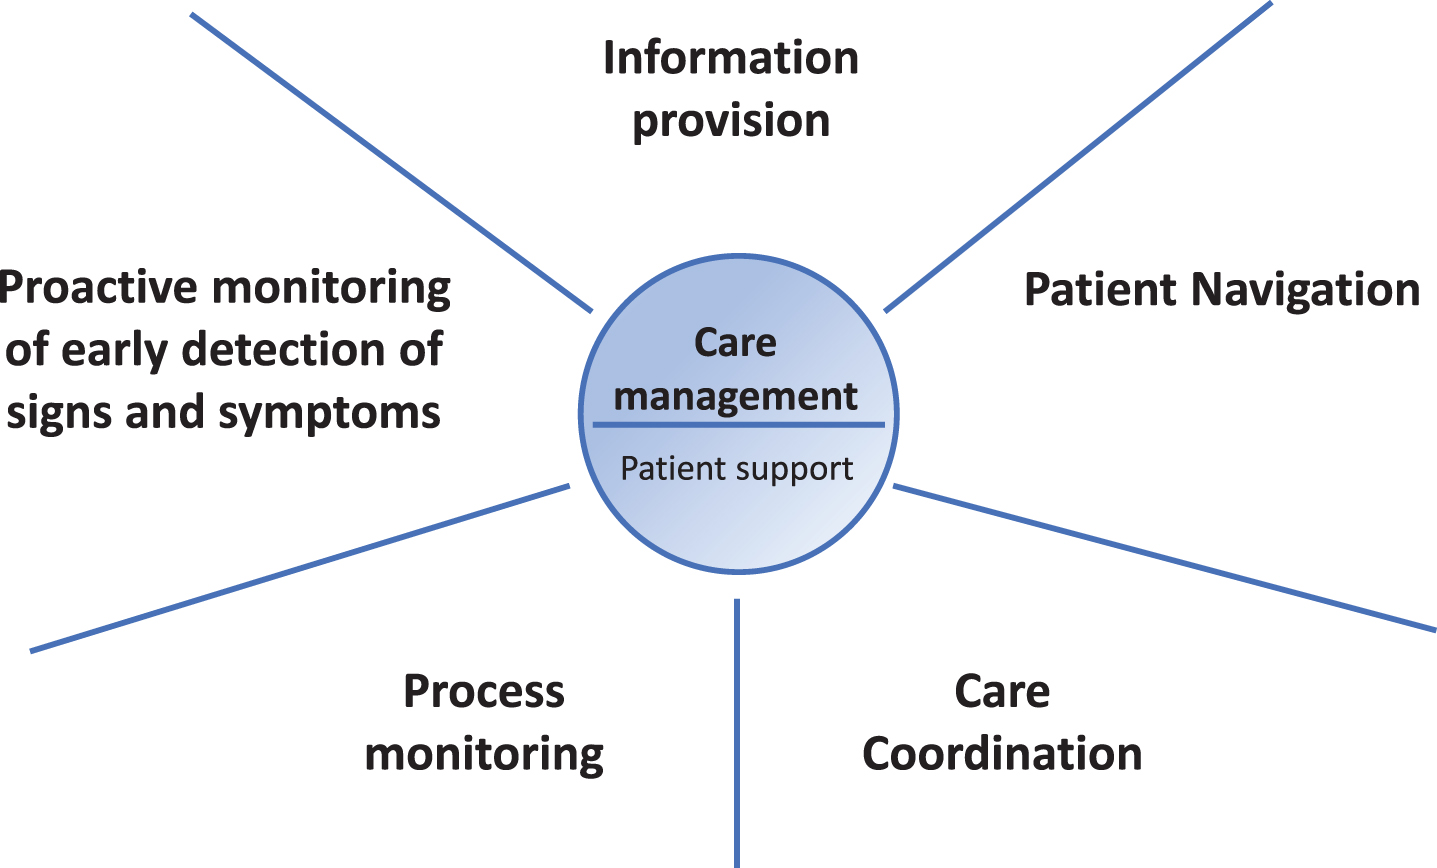 The five core elements of personalized care management for persons with PD.